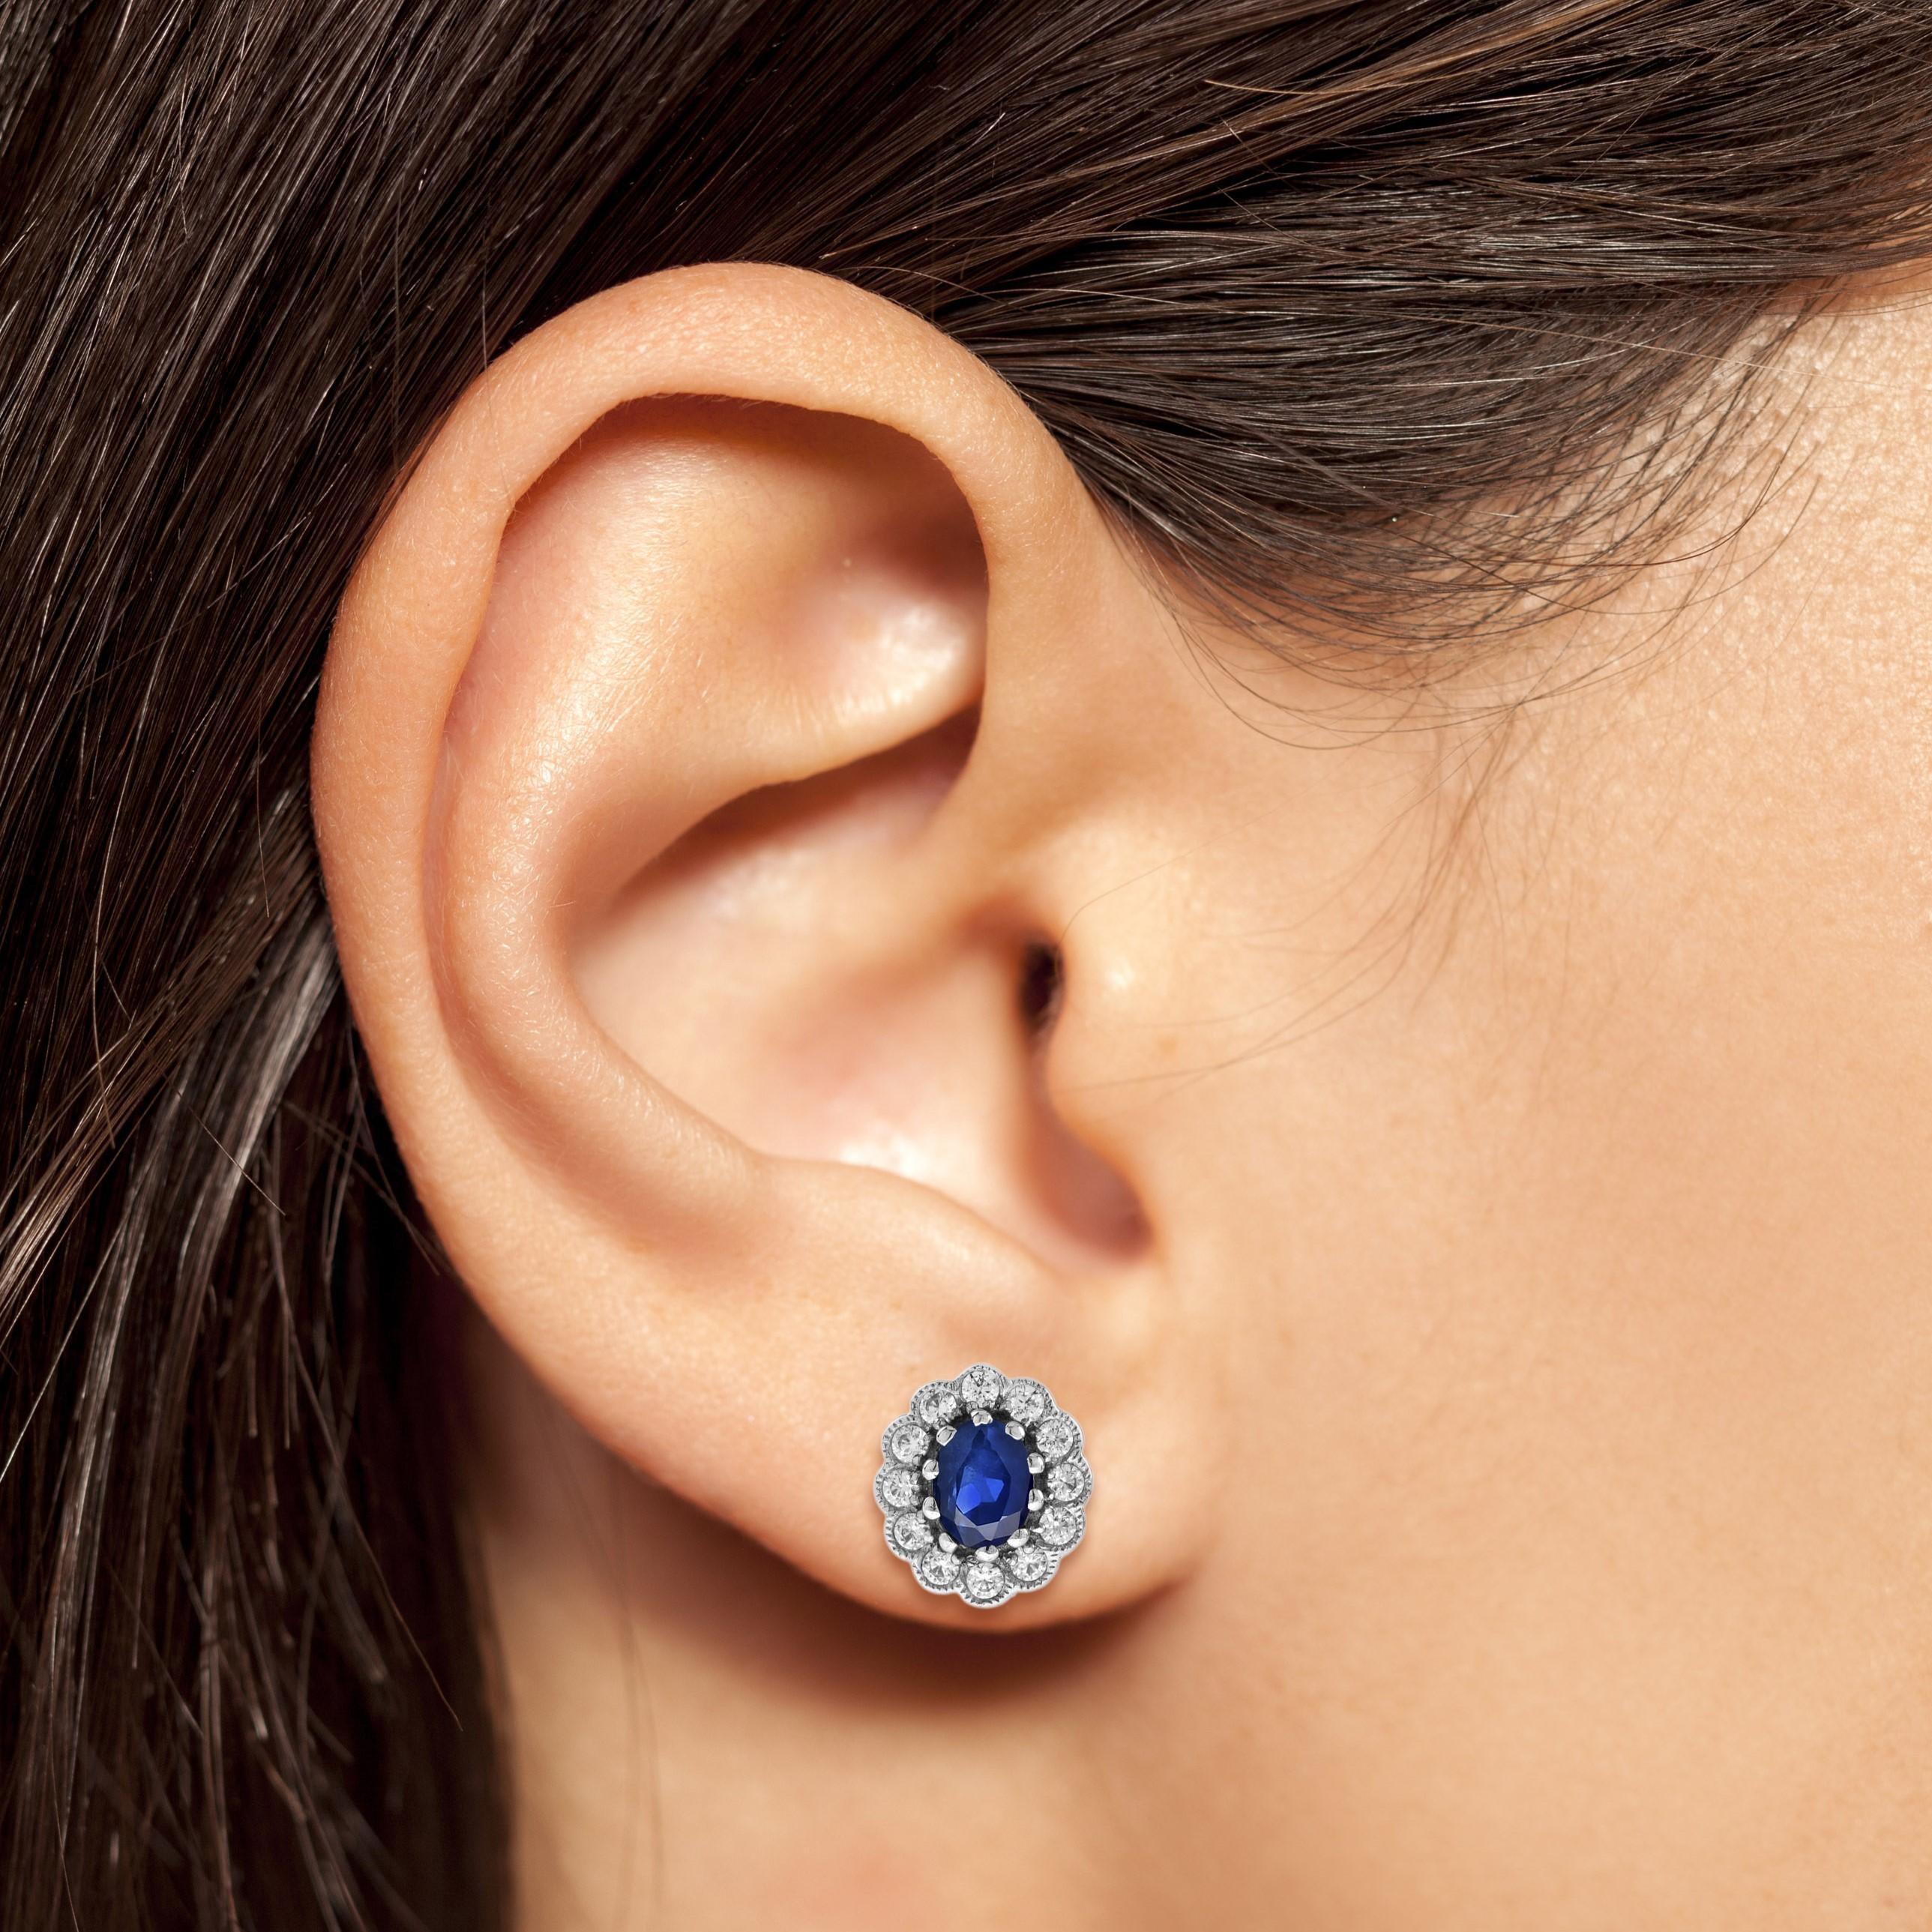 A wonderful antique inspired pair of earrings featuring an oval shape Ceylon sapphire set in a flower. Each flower is set with a round brilliant H color, SI clarity diamond accent, finished with millgrain edge. A lovely pair for your beautiful day. 